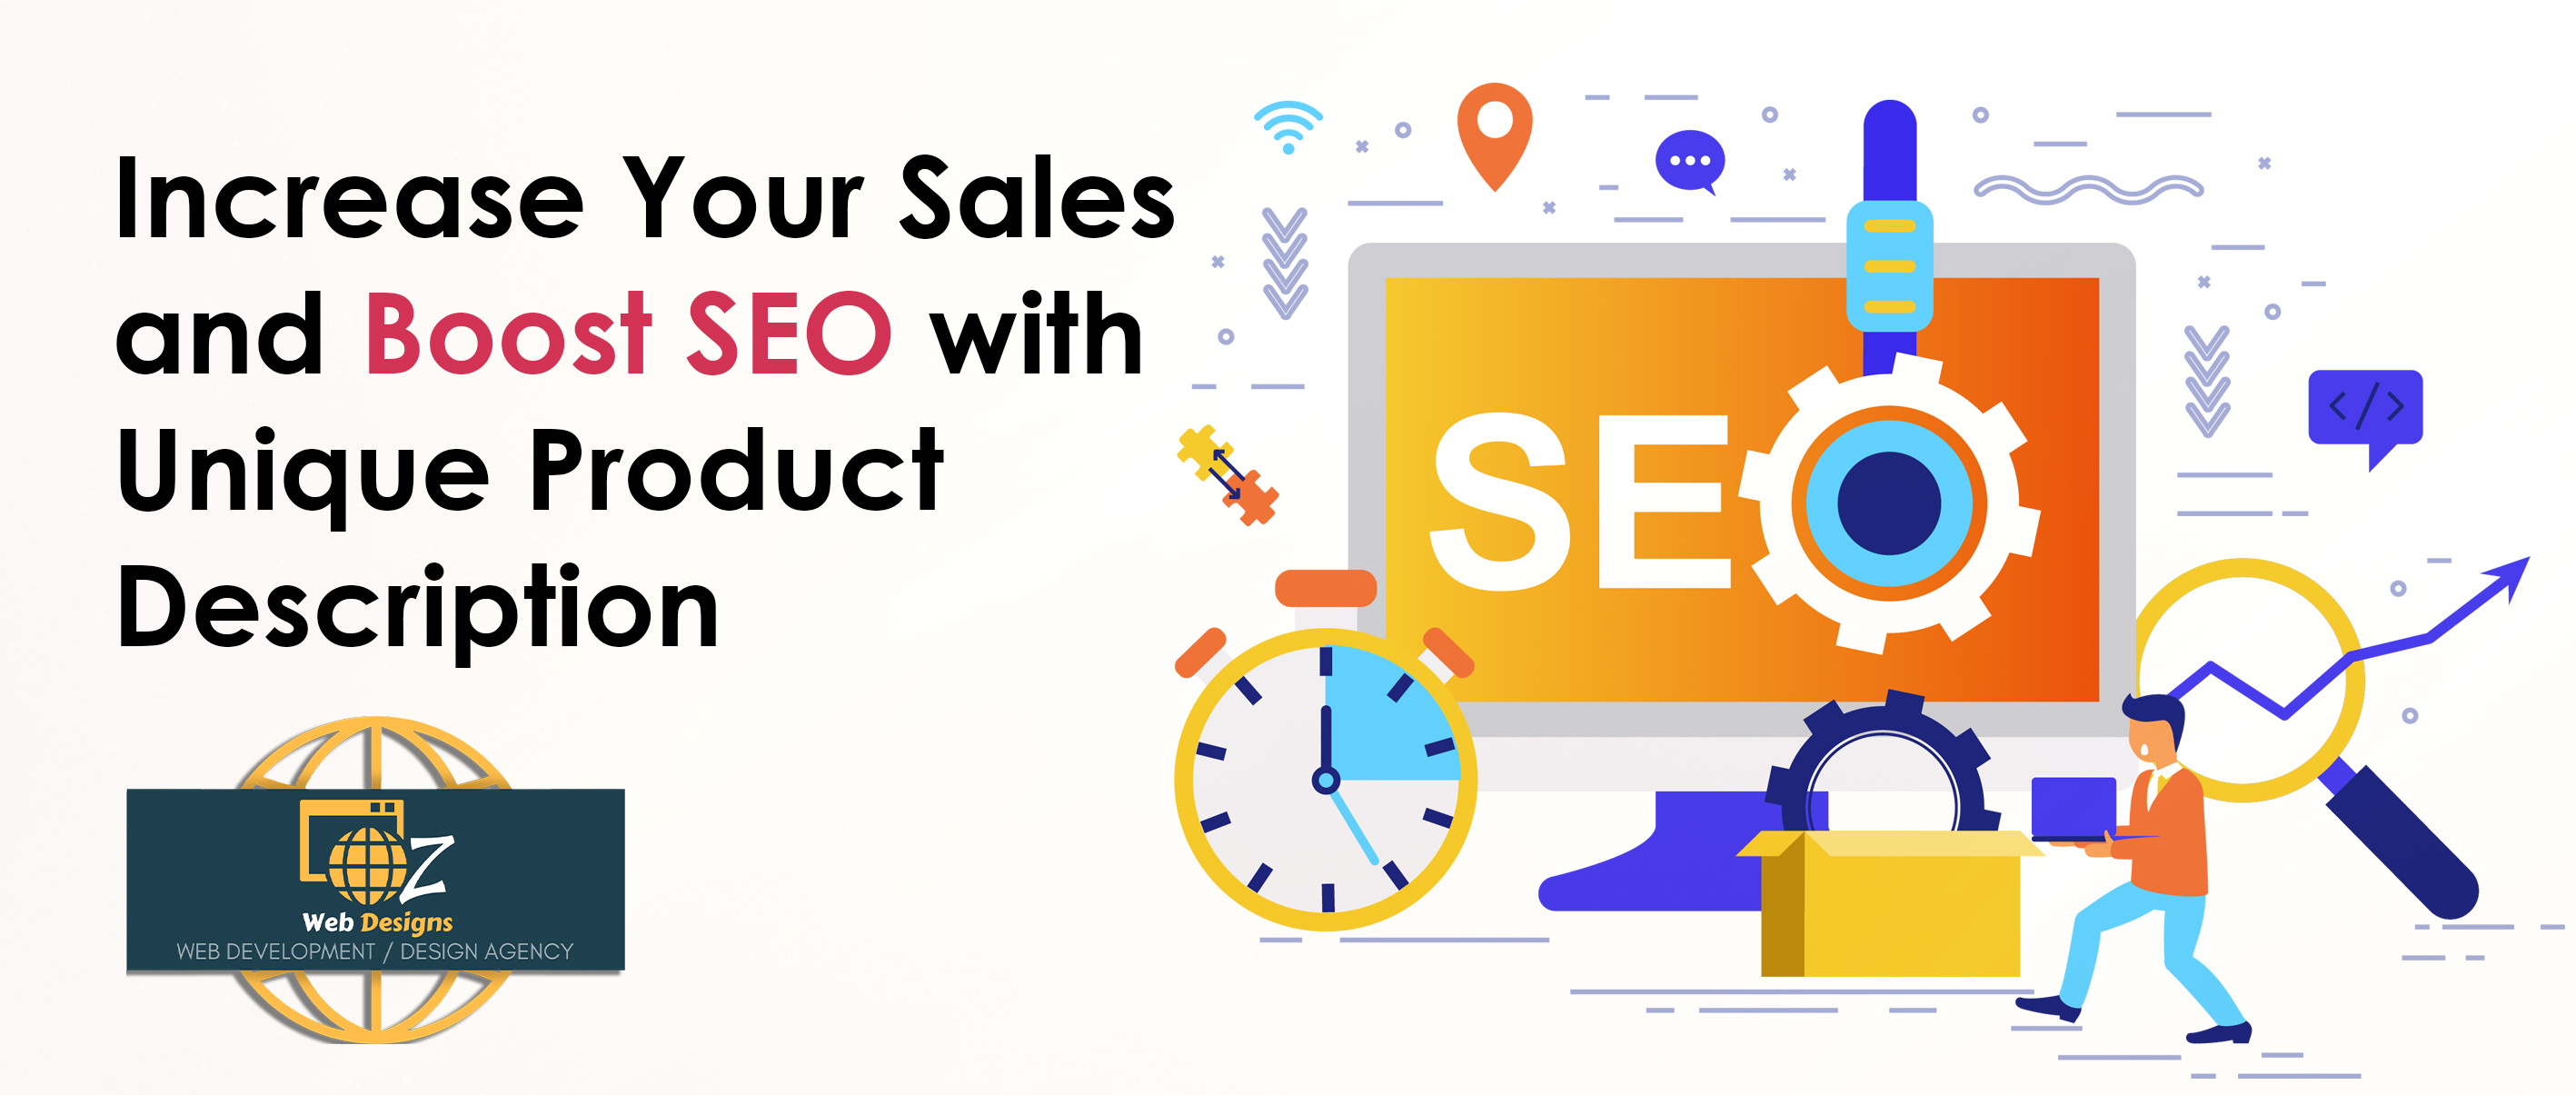 Increase Your Sales And Boost SEO With Unique Product Description